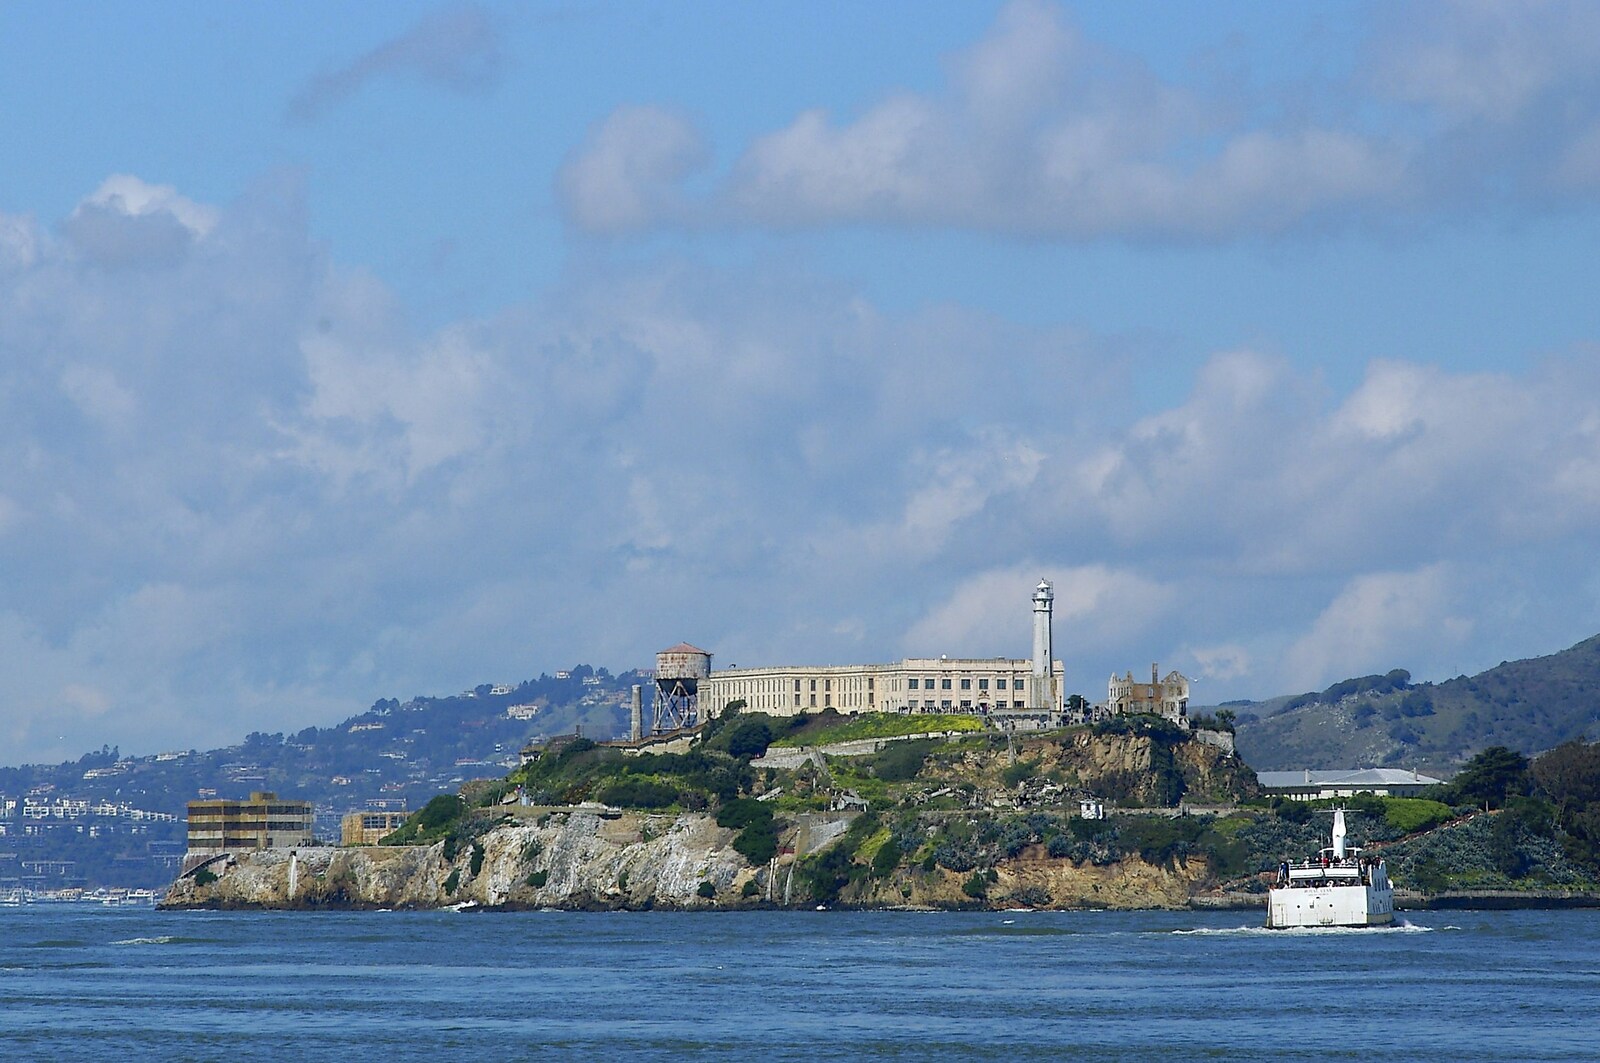 Another view of Alcatraz prison from Chinatown, Telegraph Hill and Fisherman's Wharf, San Francisco, California, US - 11th March 2006